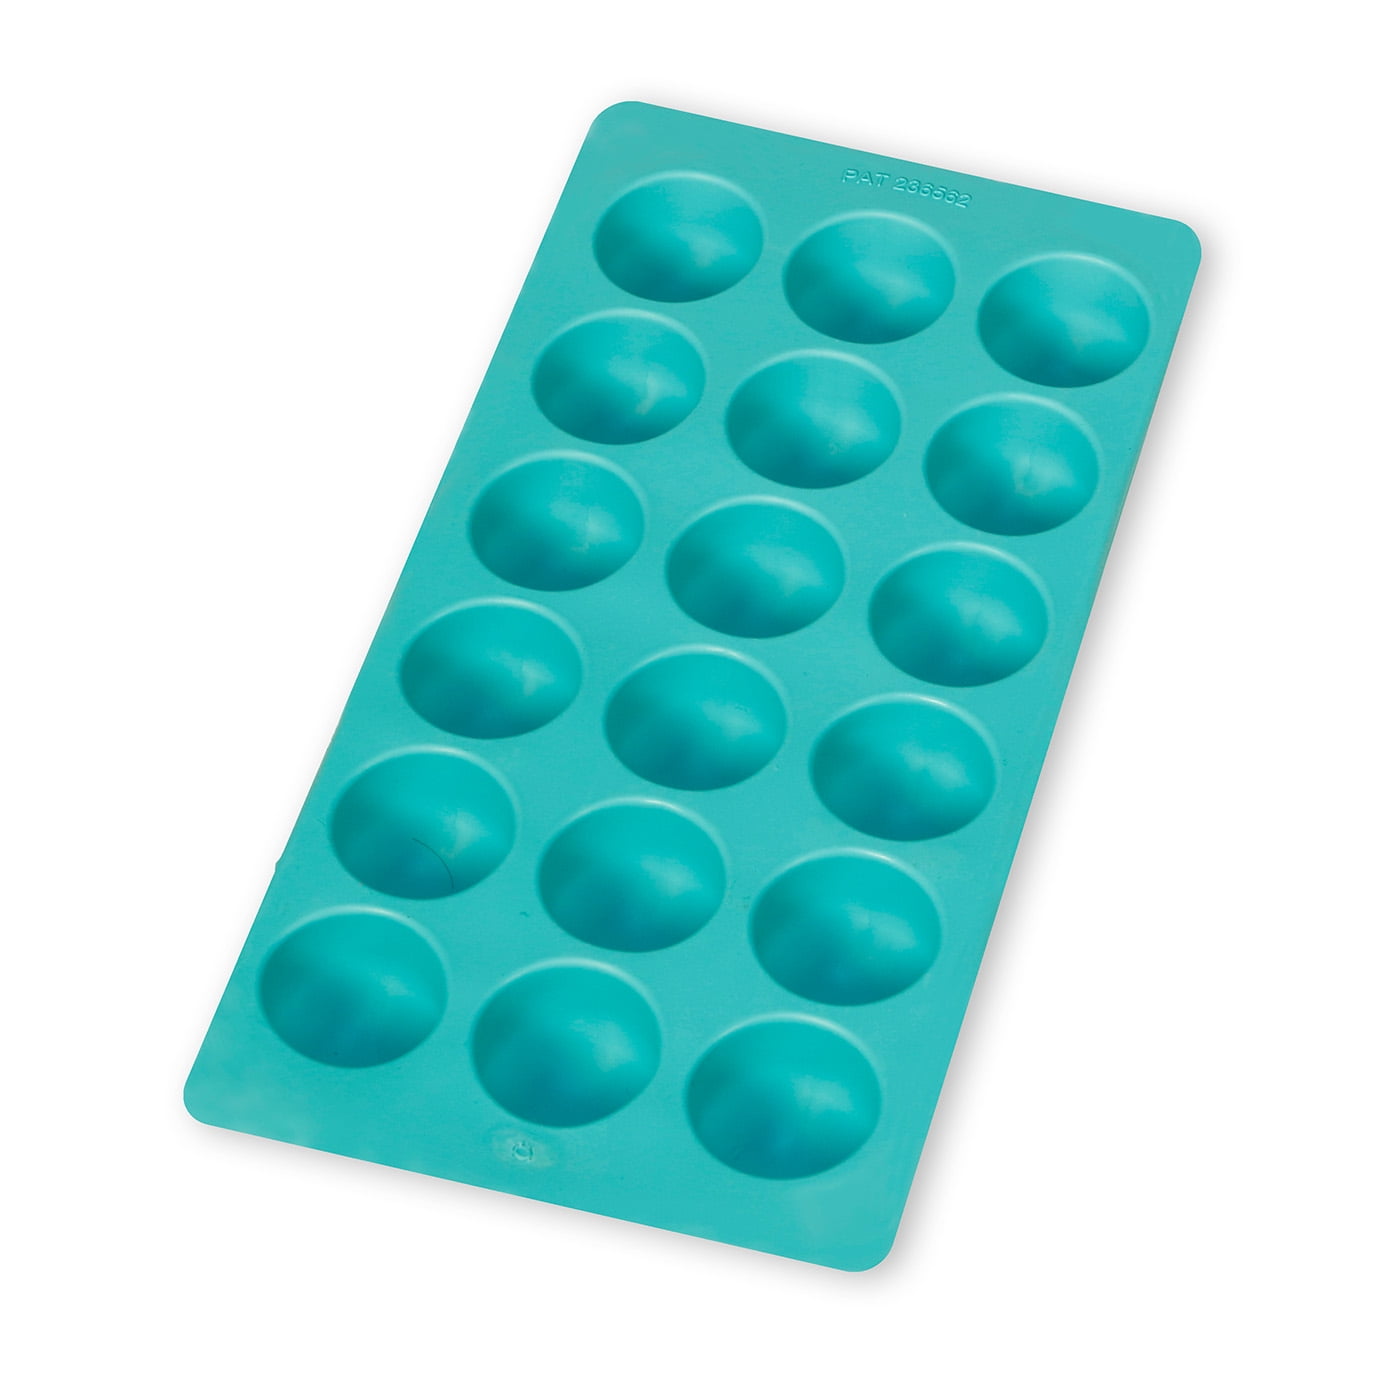 Bulk Ice Cube Trays - Assorted Colors and Shapes